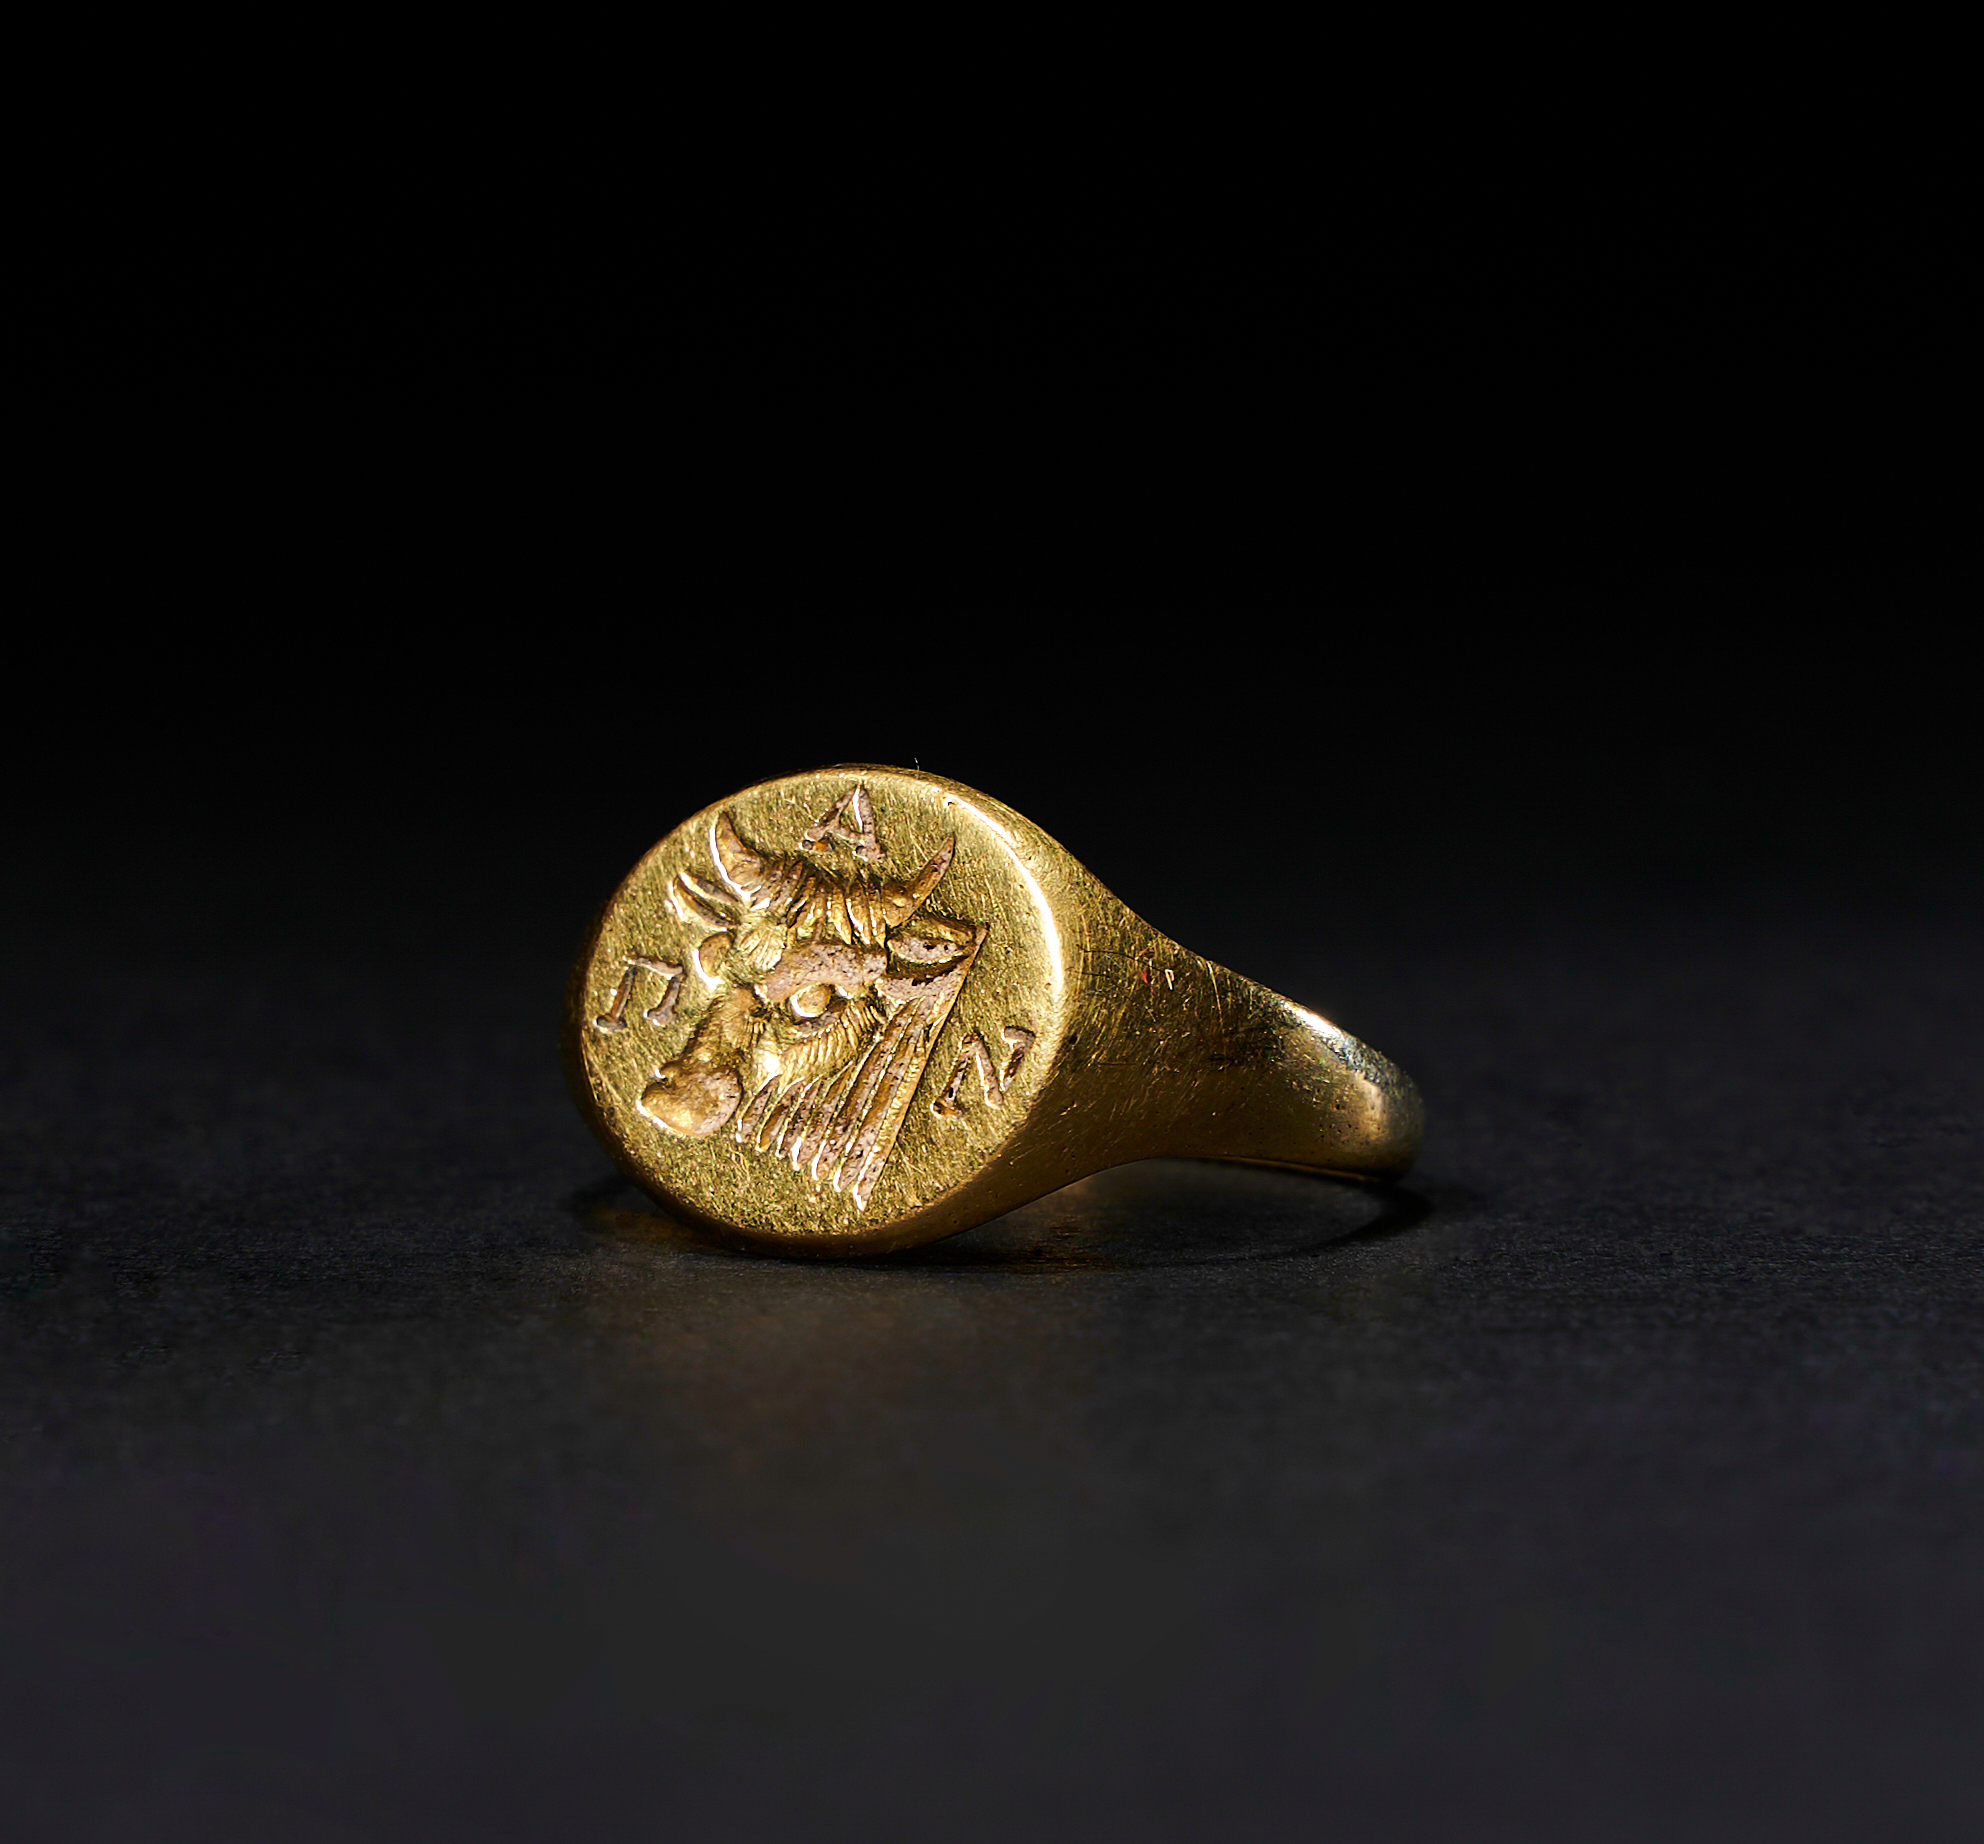 A GREEK INSCRIBED GOLD BULL RING, CIRCA 3RD CENTURY A.D. - Image 2 of 2